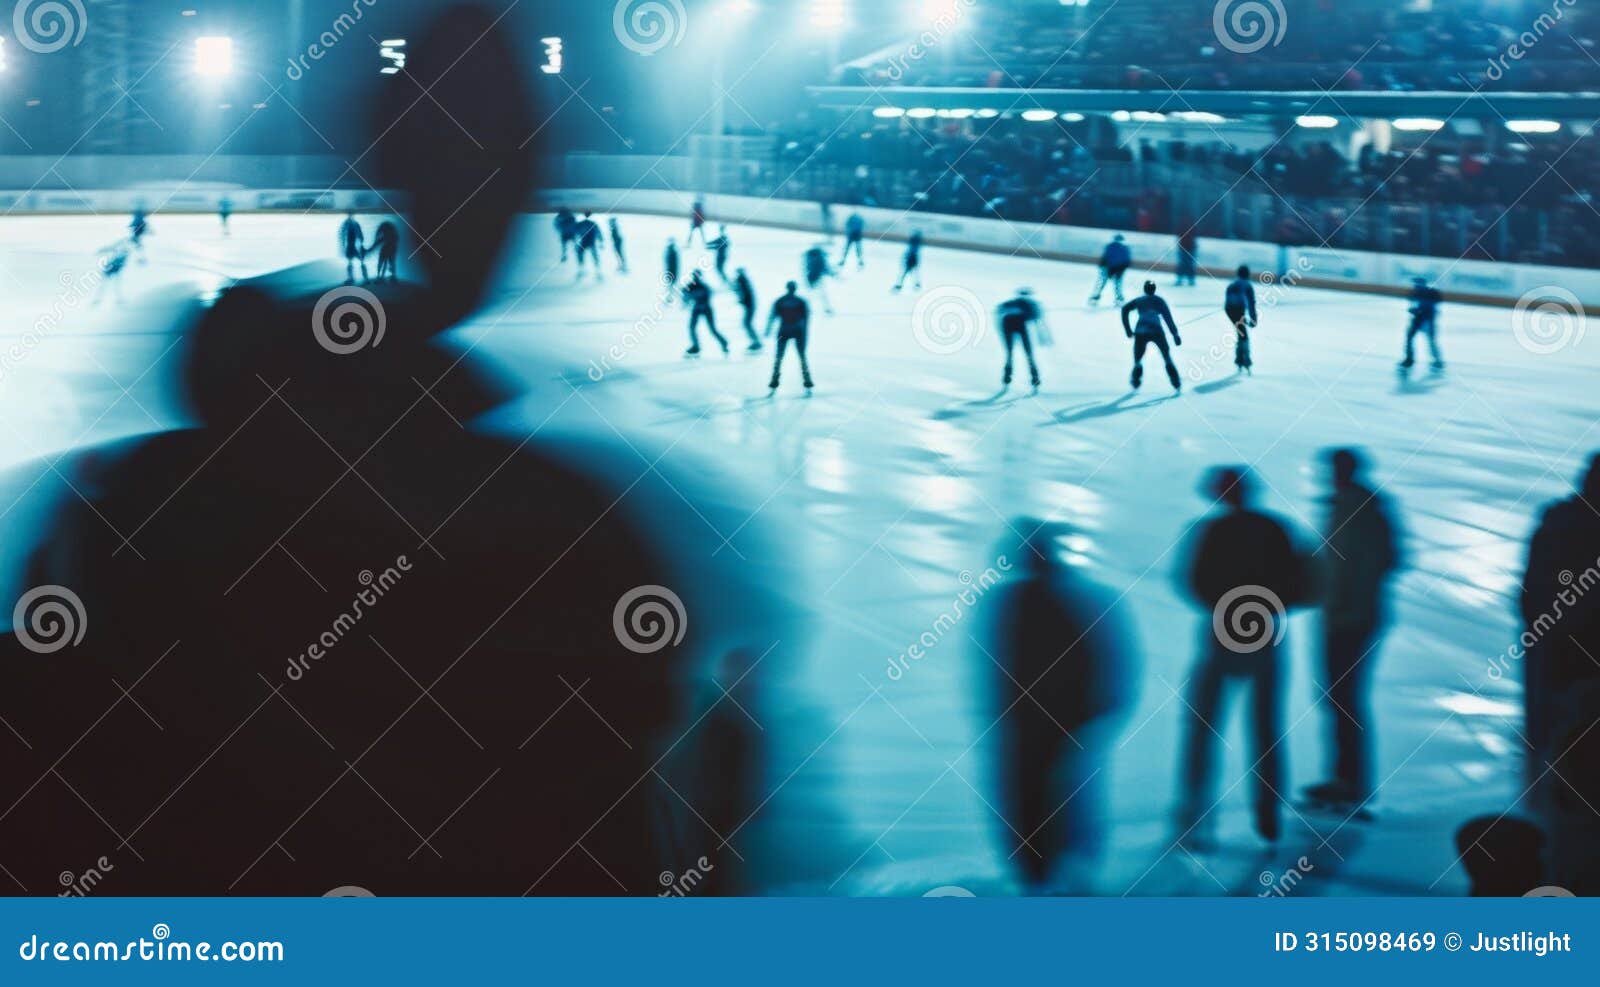 a hazy and outoffocus image of a speed skating race with spectators cheering on their favorite competitors as they glide